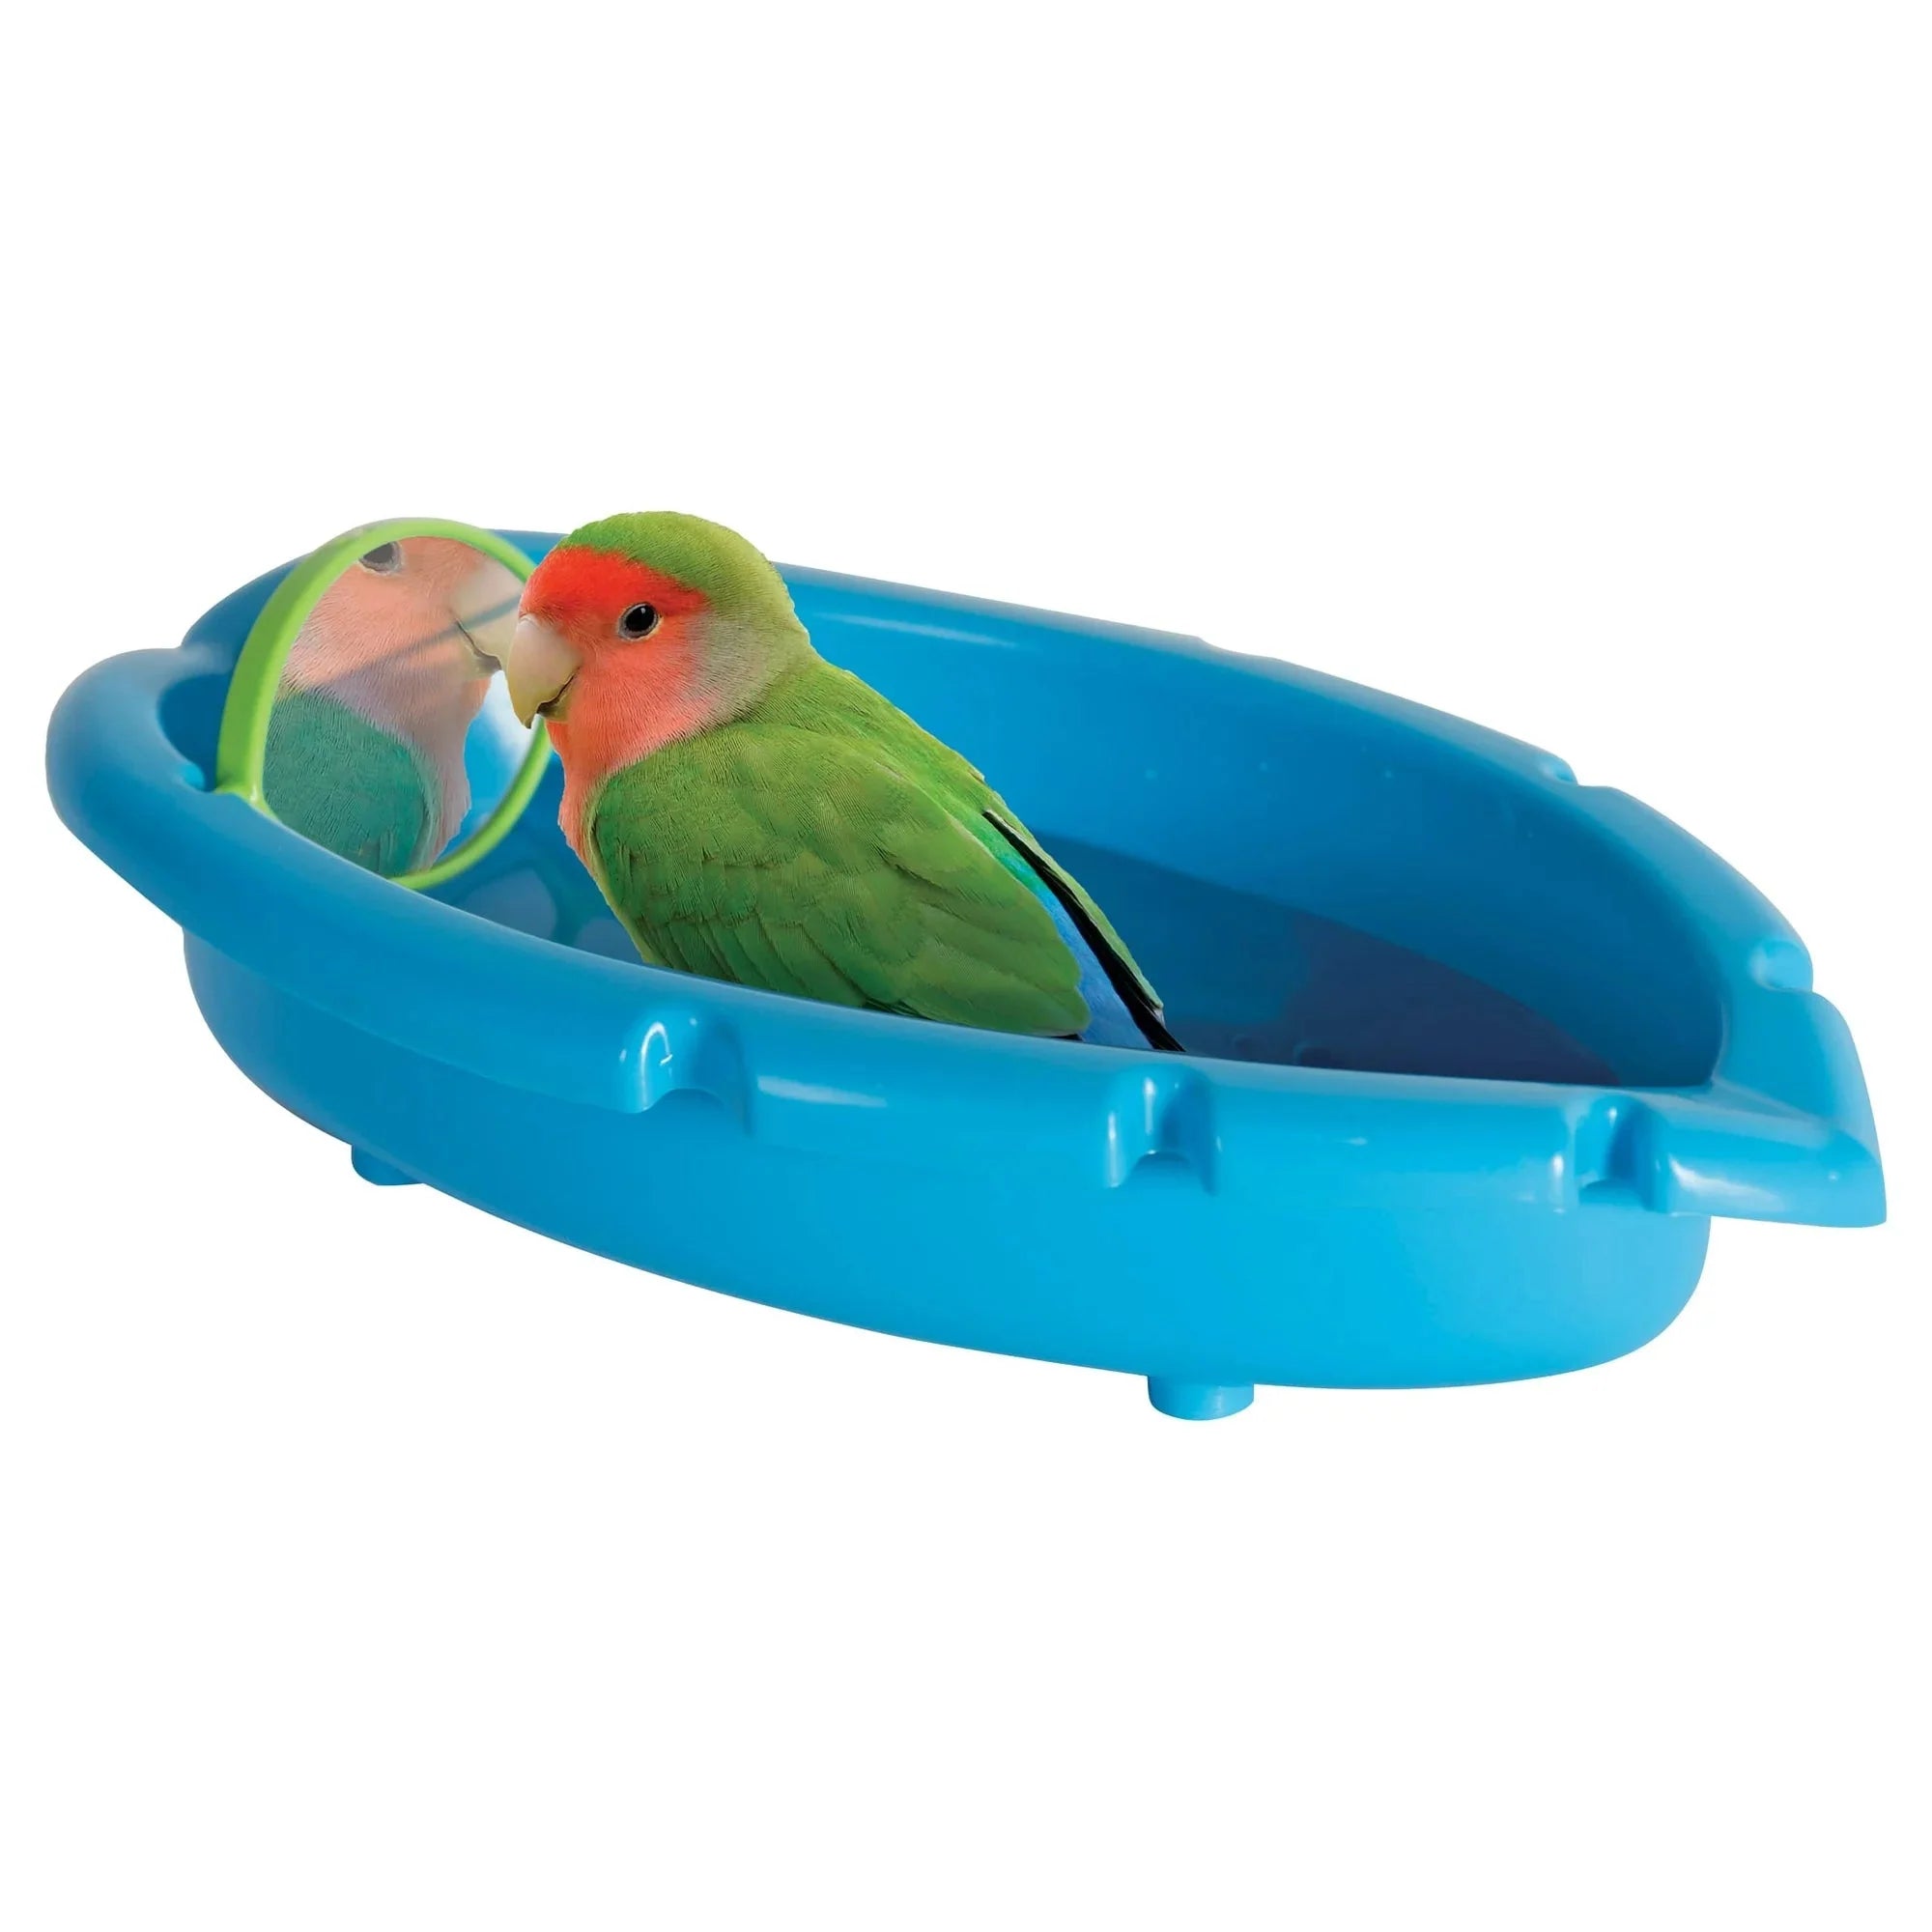 Wholesale prices with free shipping all over United States Caitec Featherland Paradise Birdie Bath Tub for Small Birds - Steven Deals